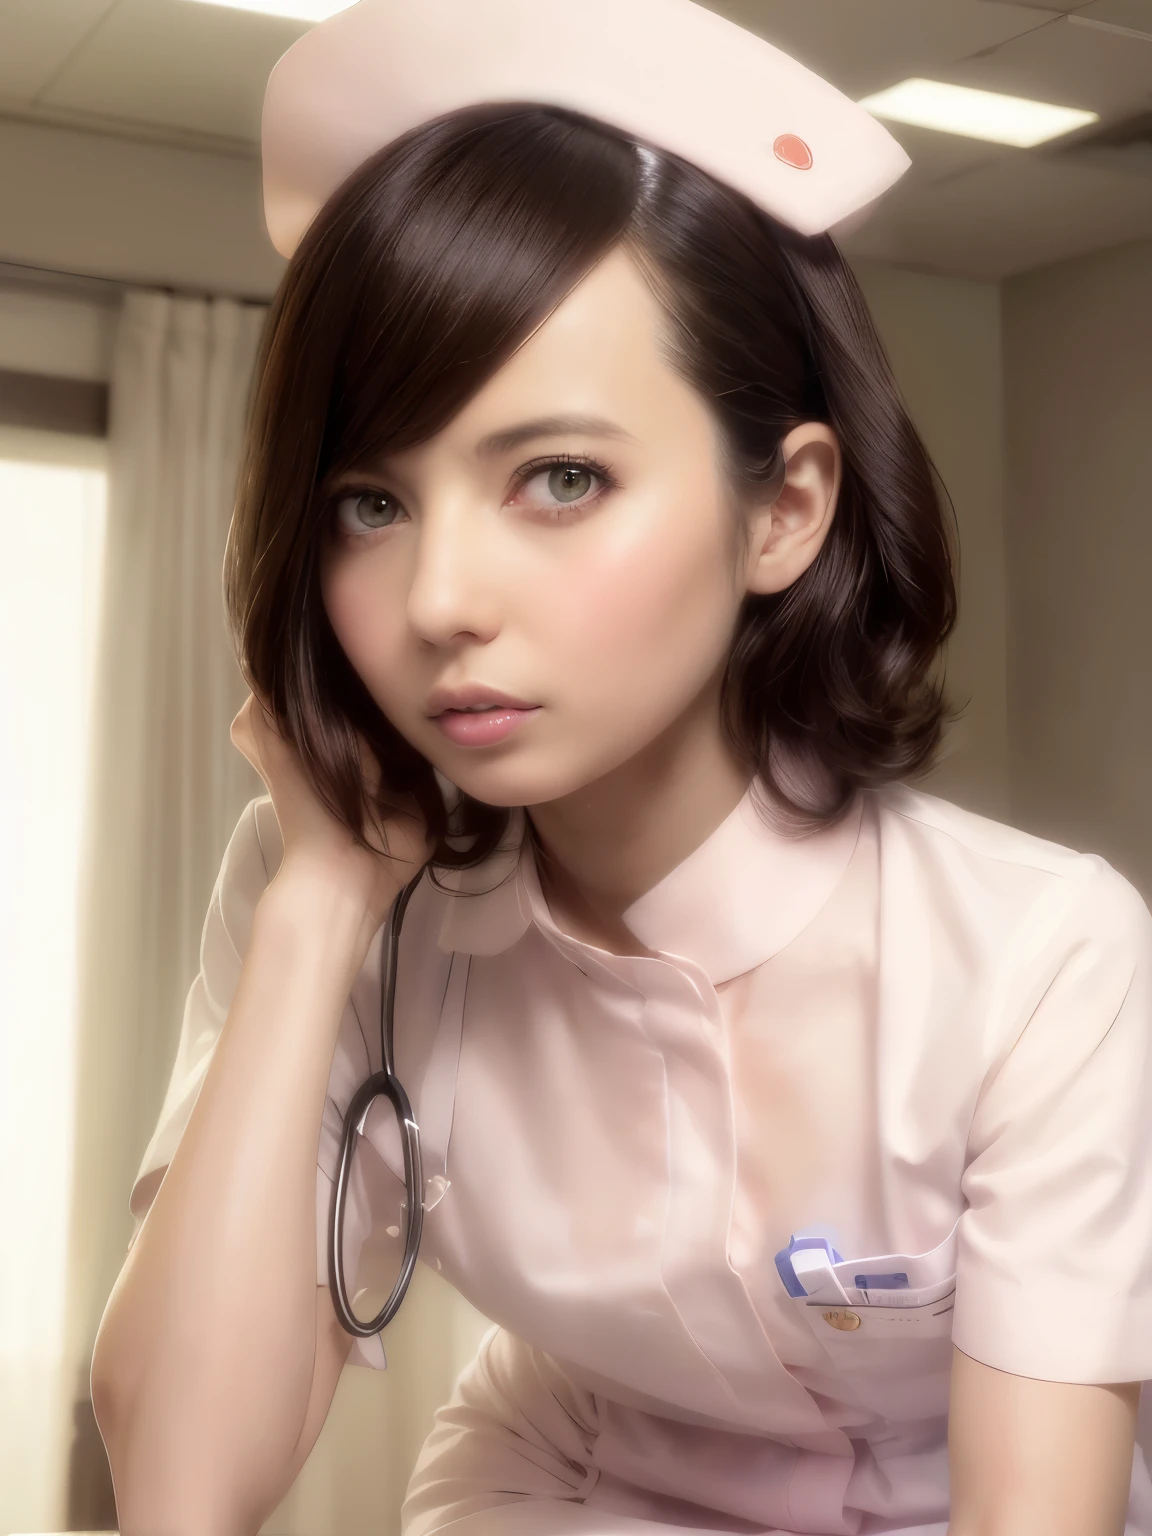 1 girl,(Wearing white nurse clothes:1.2),(Raw photo, highest quality), (realistic, photo-realistic:1.4), masterpiece, very delicate and beautiful, very detailed, 2k wallpaper, wonderful, finely, very detailed CG unity 8k wallpaper, Super detailed, High resolution, soft light, beautiful detailed girl, very detailed eyes and face, beautifully detailed nose, finely beautiful eyes, nurse, perfect anatomy, black hair, up style, nurse uniform, ((nurse cap)), long skirt, nurse, white costume, thin, hospital, clear, white uniform, hospital room, Neck auscultation,close up face,(becky)